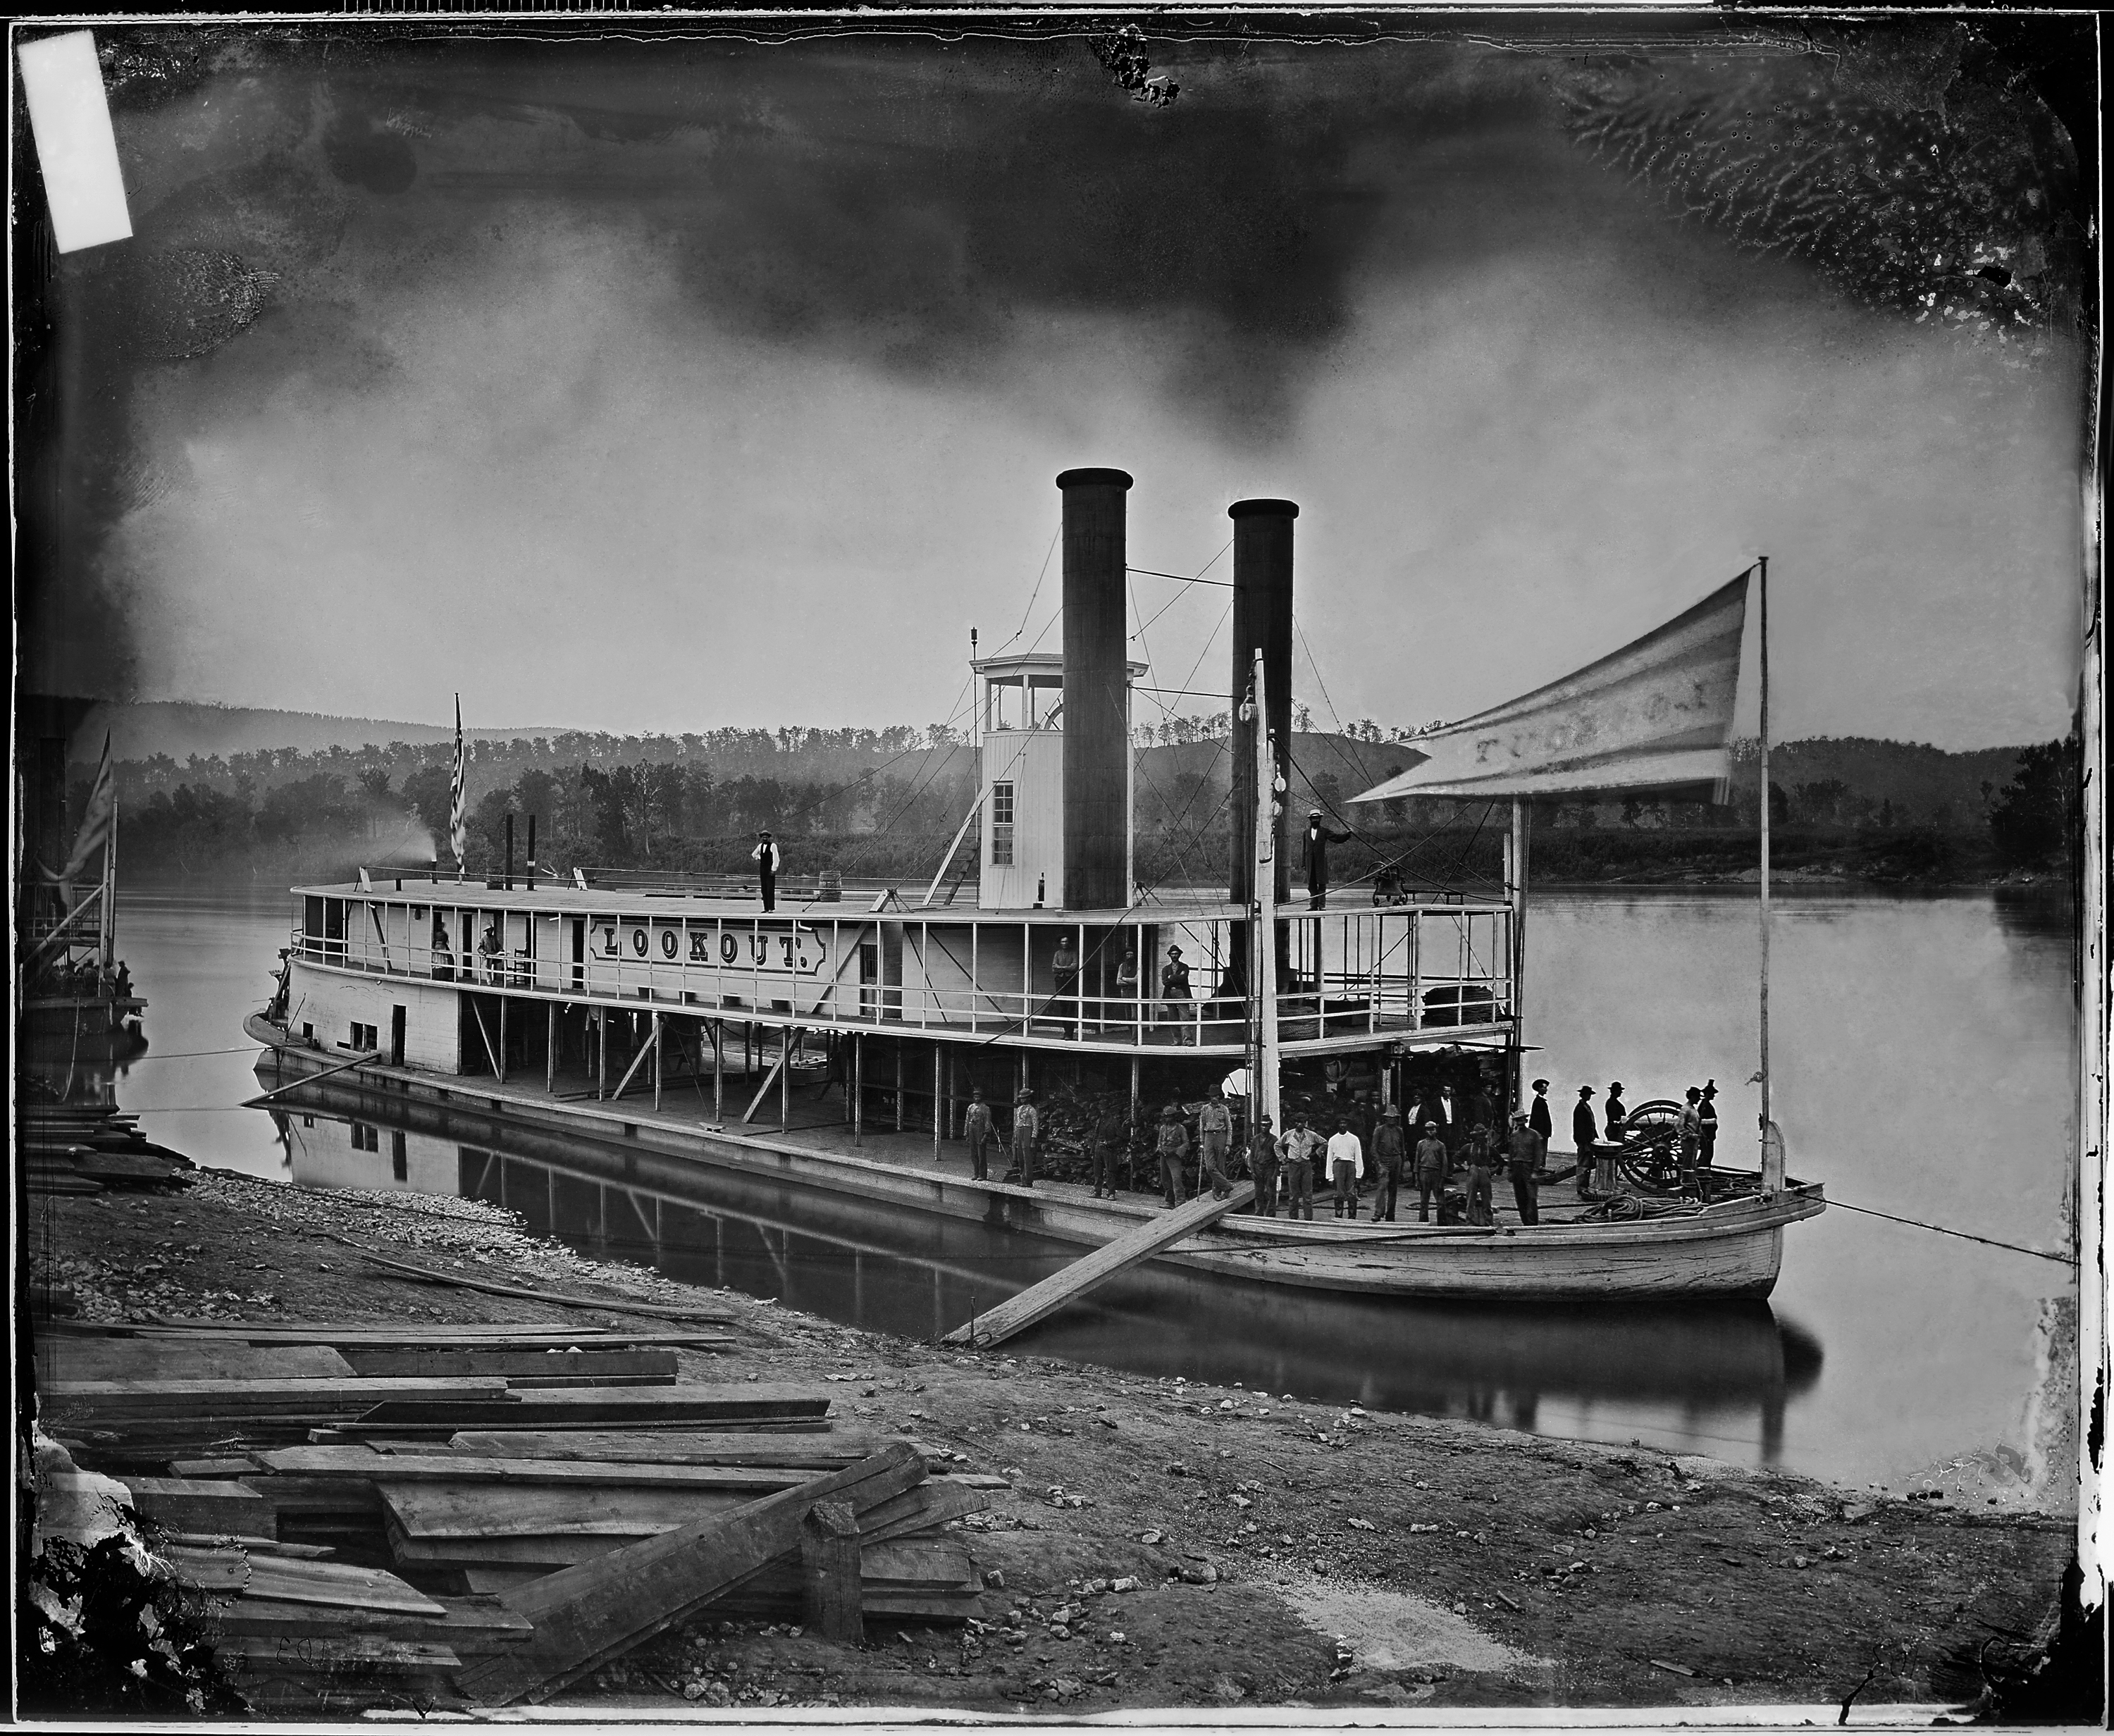 _look_out_transport_steamer_on_tennessee_river_nara_5289791_restored.jpg